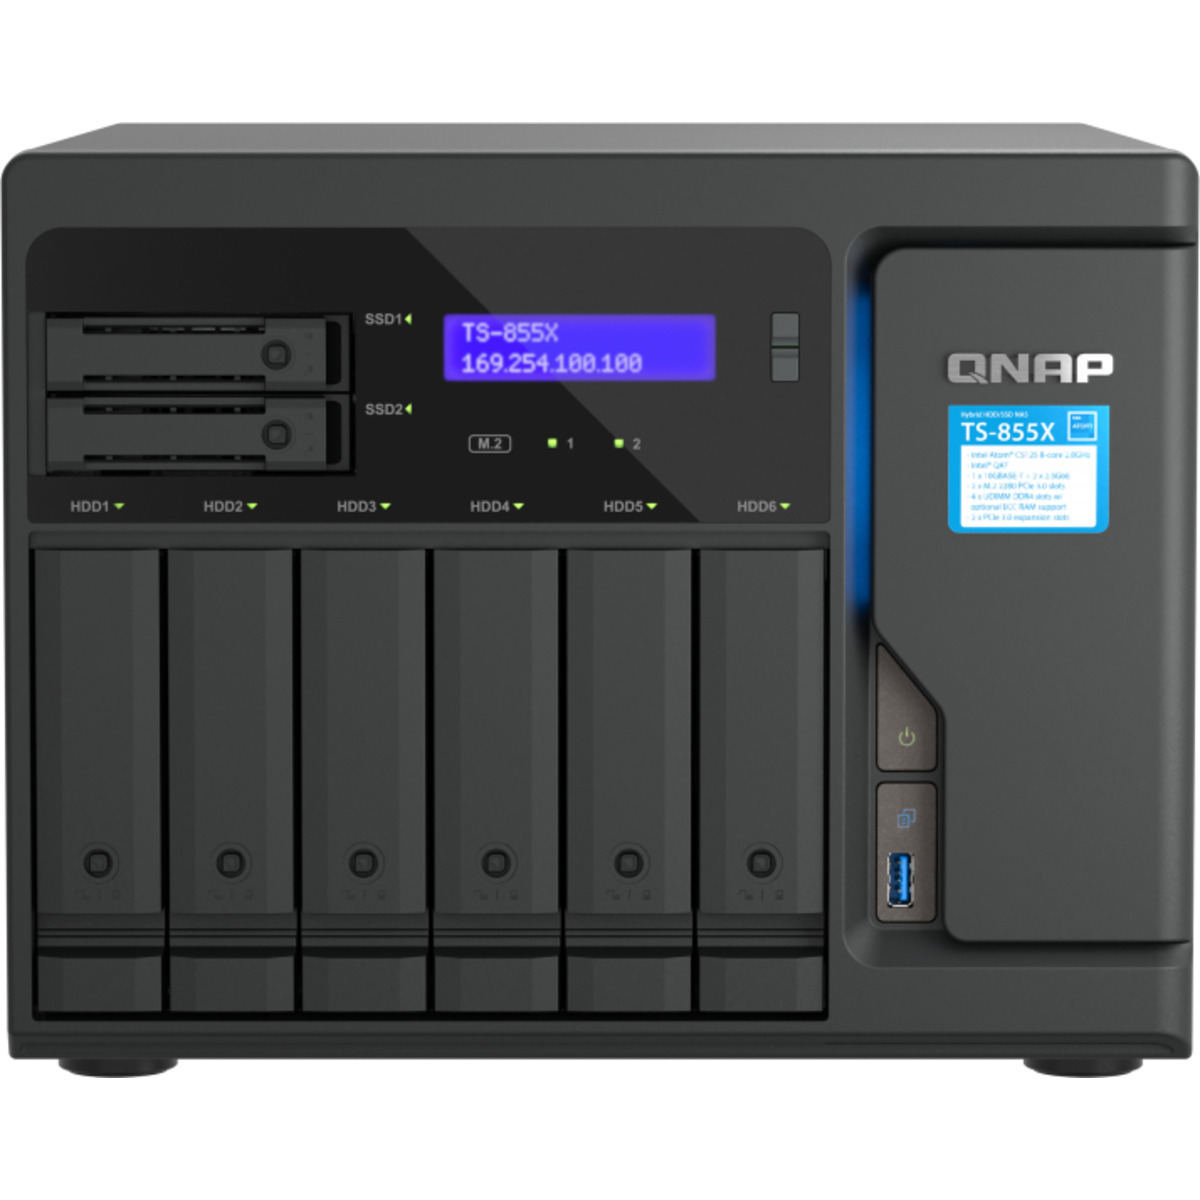 buy QNAP TS-855X 132tb Desktop NAS - Network Attached Storage Device 6x22000gb Western Digital Red Pro WD221KFGX 3.5 7200rpm SATA 6Gb/s HDD NAS Class Drives Installed - Burn-In Tested - FREE RAM UPGRADE - nas headquarters buy network attached storage server device das new raid-5 free shipping simply usa TS-855X